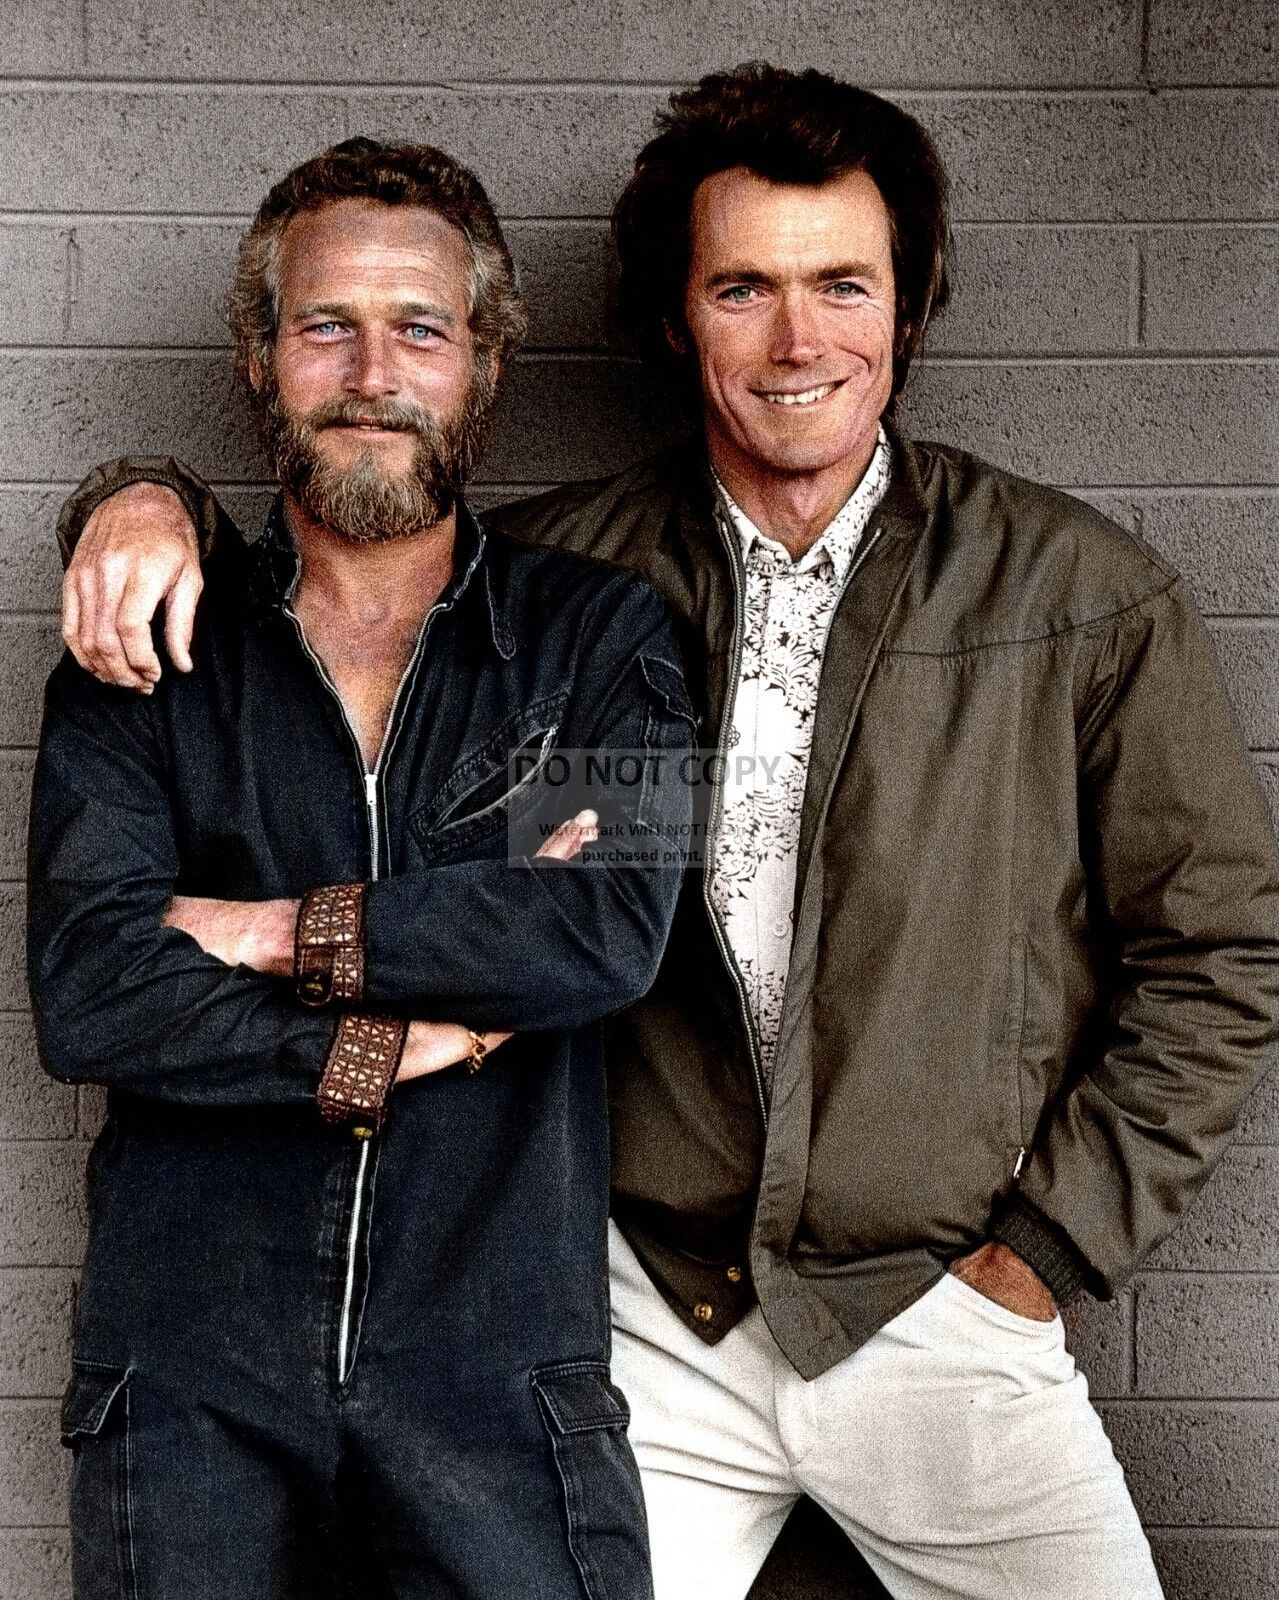 PAUL NEWMAN AND CLINT EASTWOOD IN 1972 - 8X10 PUBLICITY PHOTO (OP-006)